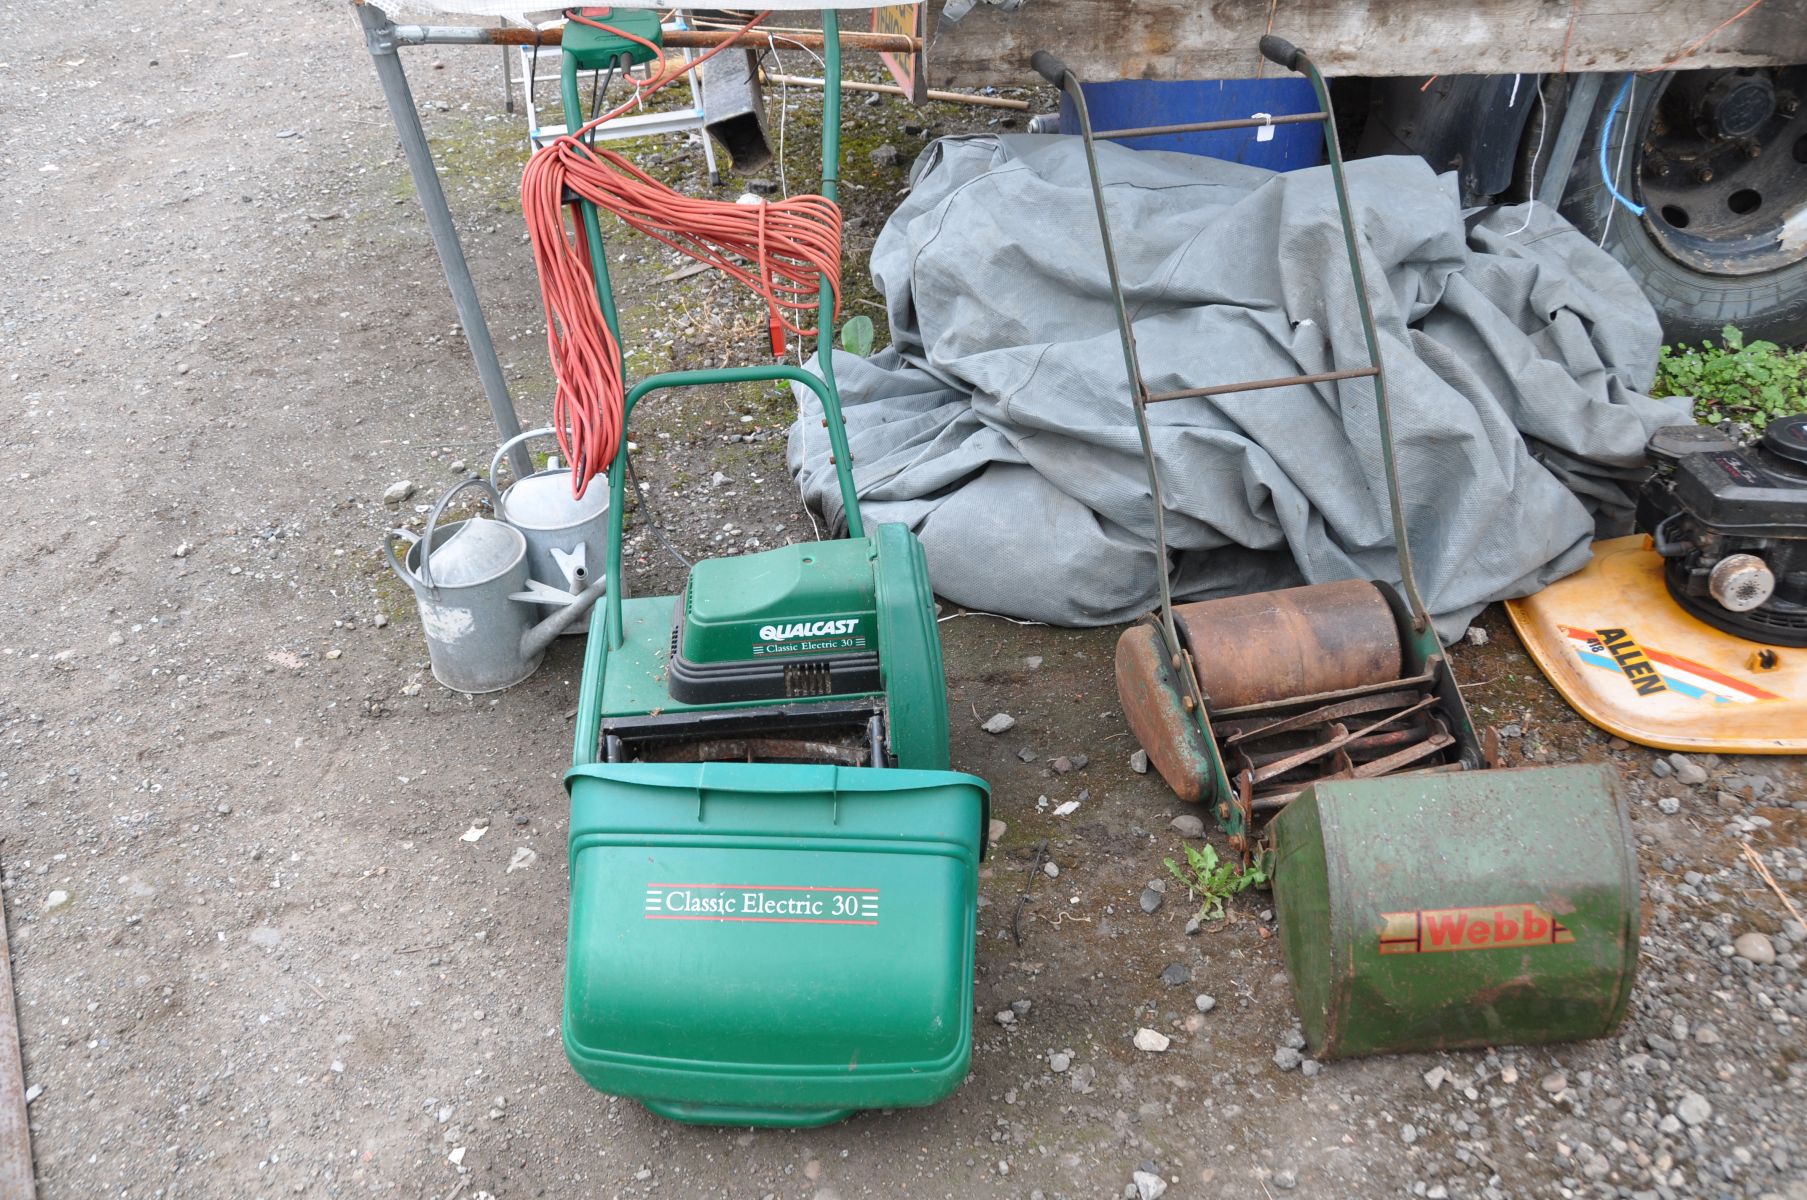 A QUALCAST CLASSIC ELECTRIC 30 CYLINDER LAWN MOWER with grass box (PAT pass and working) and a